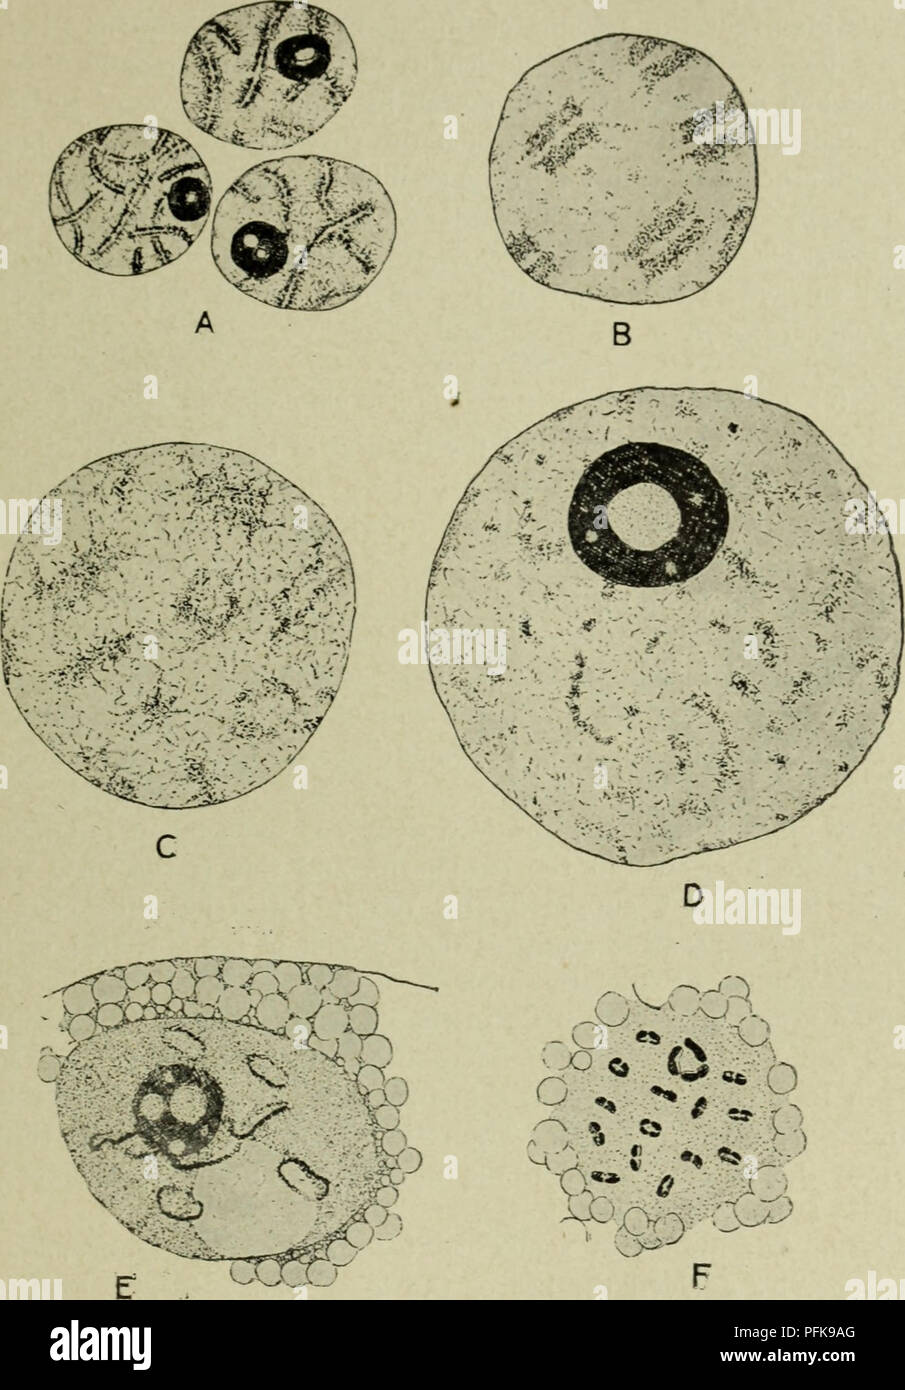 . Cytology, with special reference to the metazoan nucleus. Cells. ii MEIOSIS IN THE FEMALE 6l germinal vesicles with diffuse chromosomes are to be found, and it is evident that the bivalents resulting from syndesis condense continuously. Fig. 25. The chromosomes during the oogenesis of Diaptomus castor from the pachytene stage (A), through the germinal vesicle stage (B-E) to the condensation of the definitive bivalents (F). (Matschek, A.Z., 1910.) into the definitive bivalents of metaphase I. Animals, however, which are carrying egg-sacs contain in their oviducts oocytes with well-developed g Stock Photo